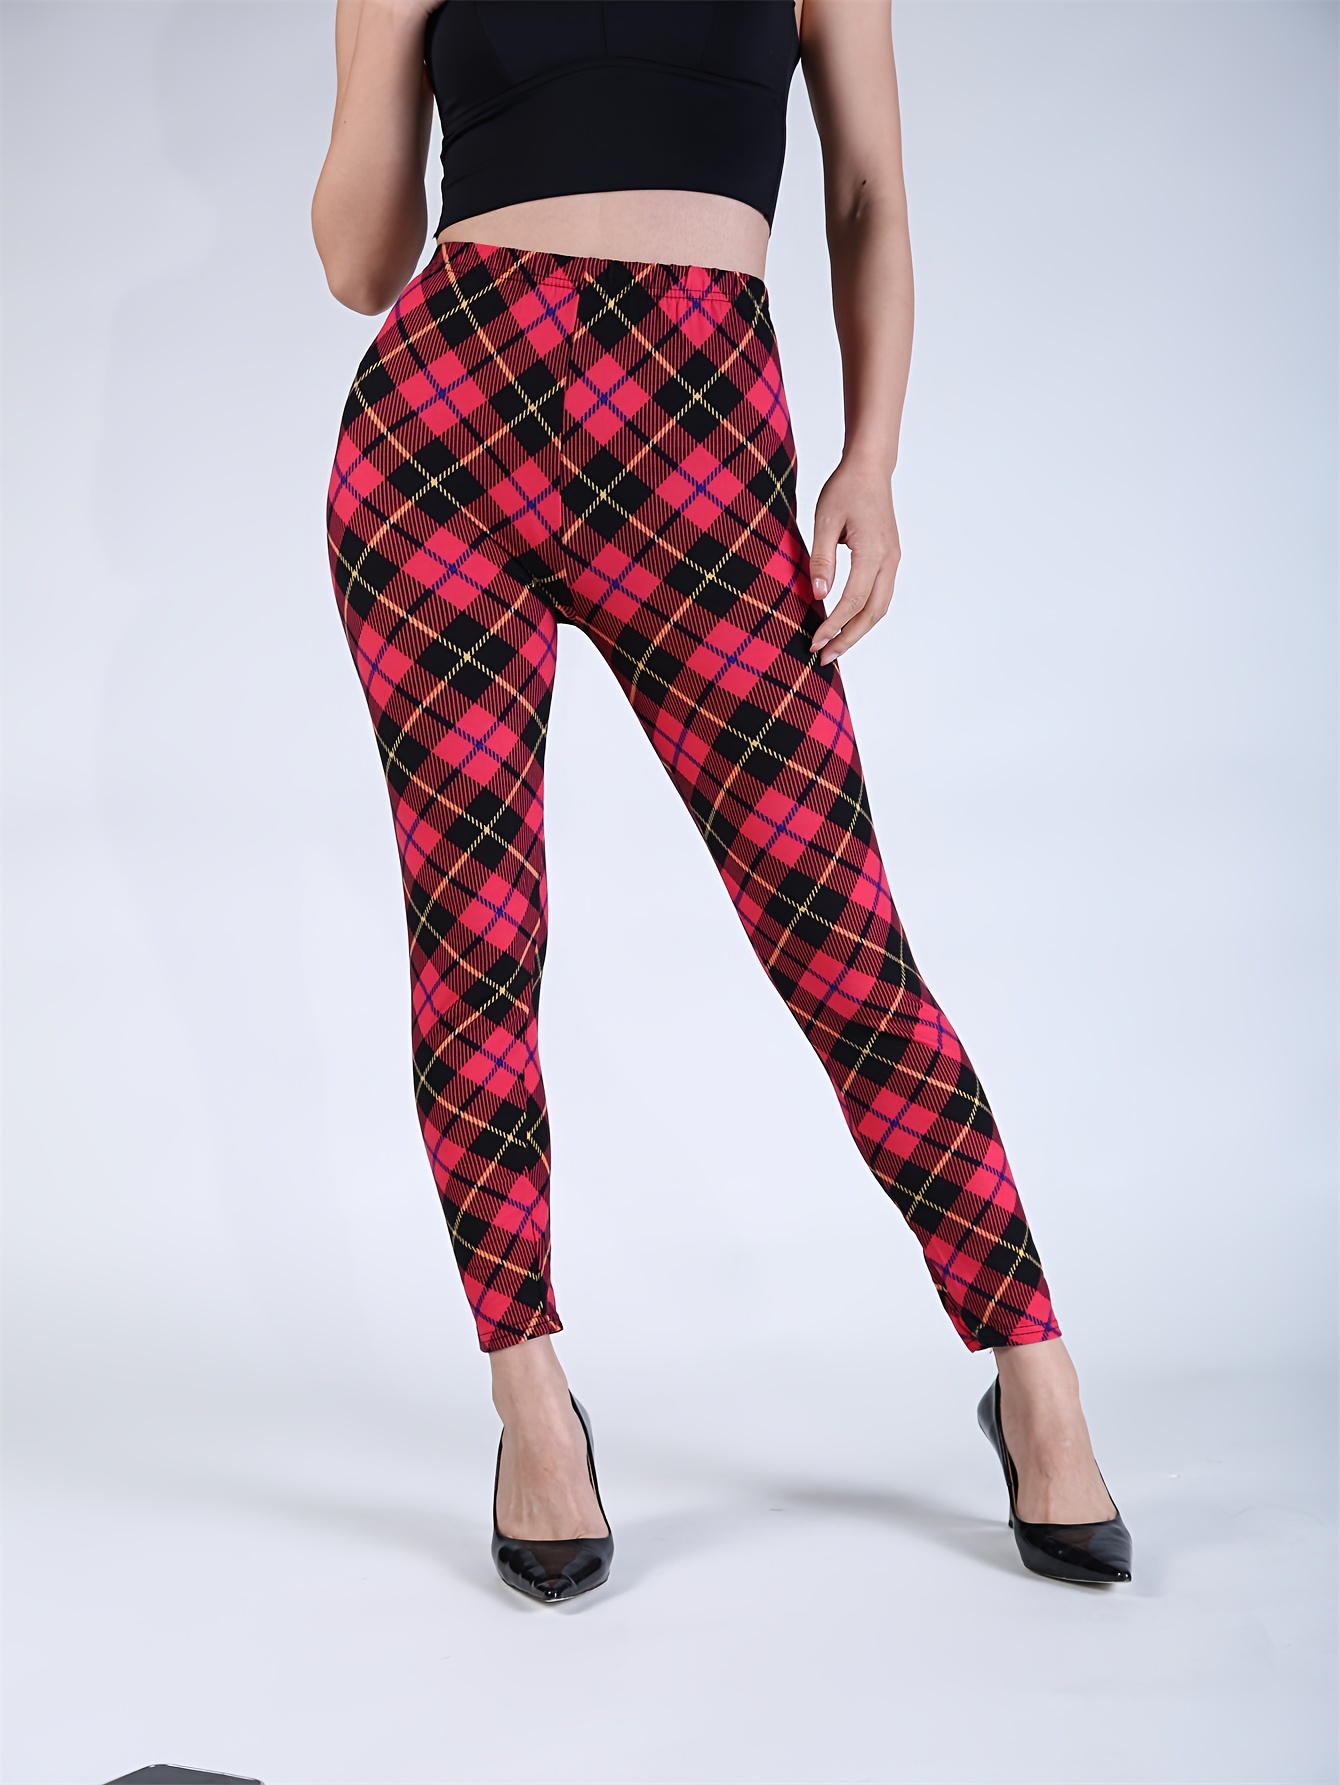 Women's Black And Red Plaid Leggings & Tights